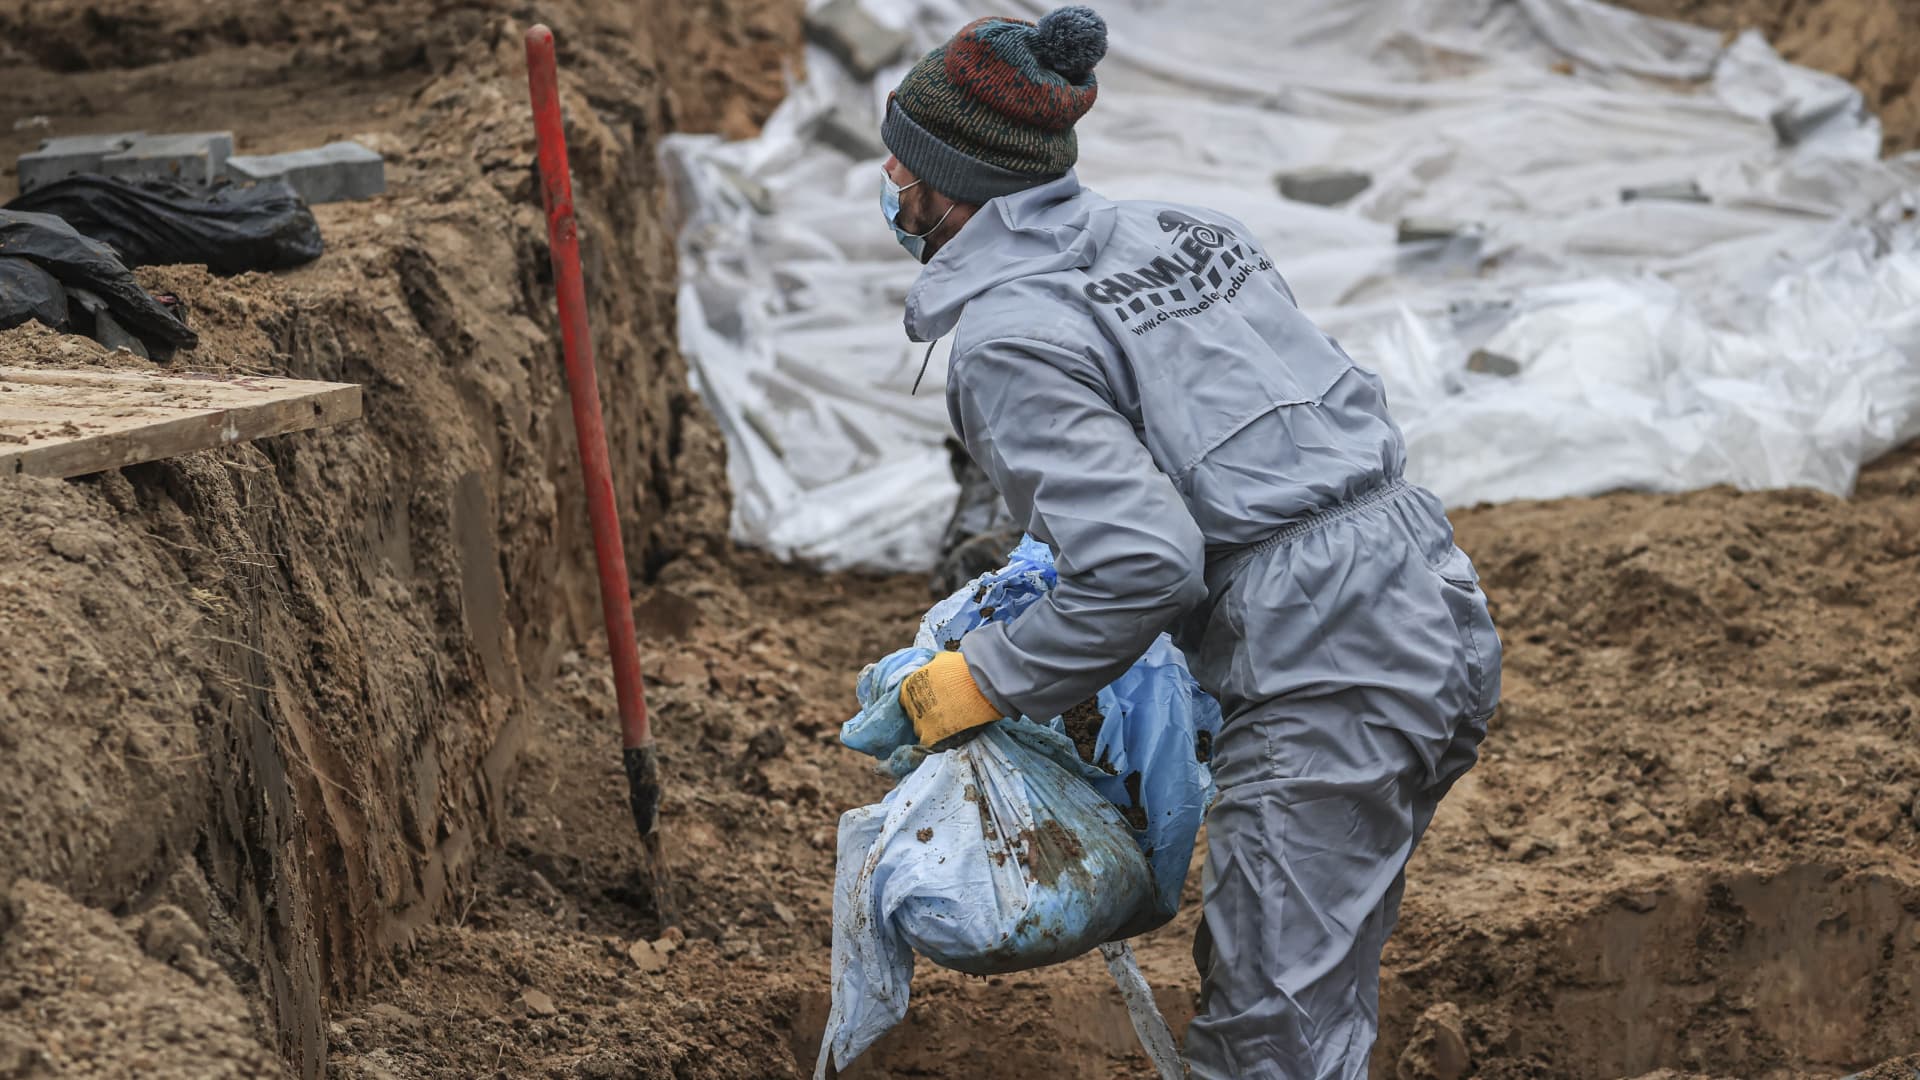 (EDITORS NOTE: Image depicts death) Officials continue to exhume the bodies of civilians who died during the Russian attacks, from second mass grave, found at backyard of St. Andrea's Church in Bucha, Kyiv Oblast, Ukraine on April 13, 2022. 